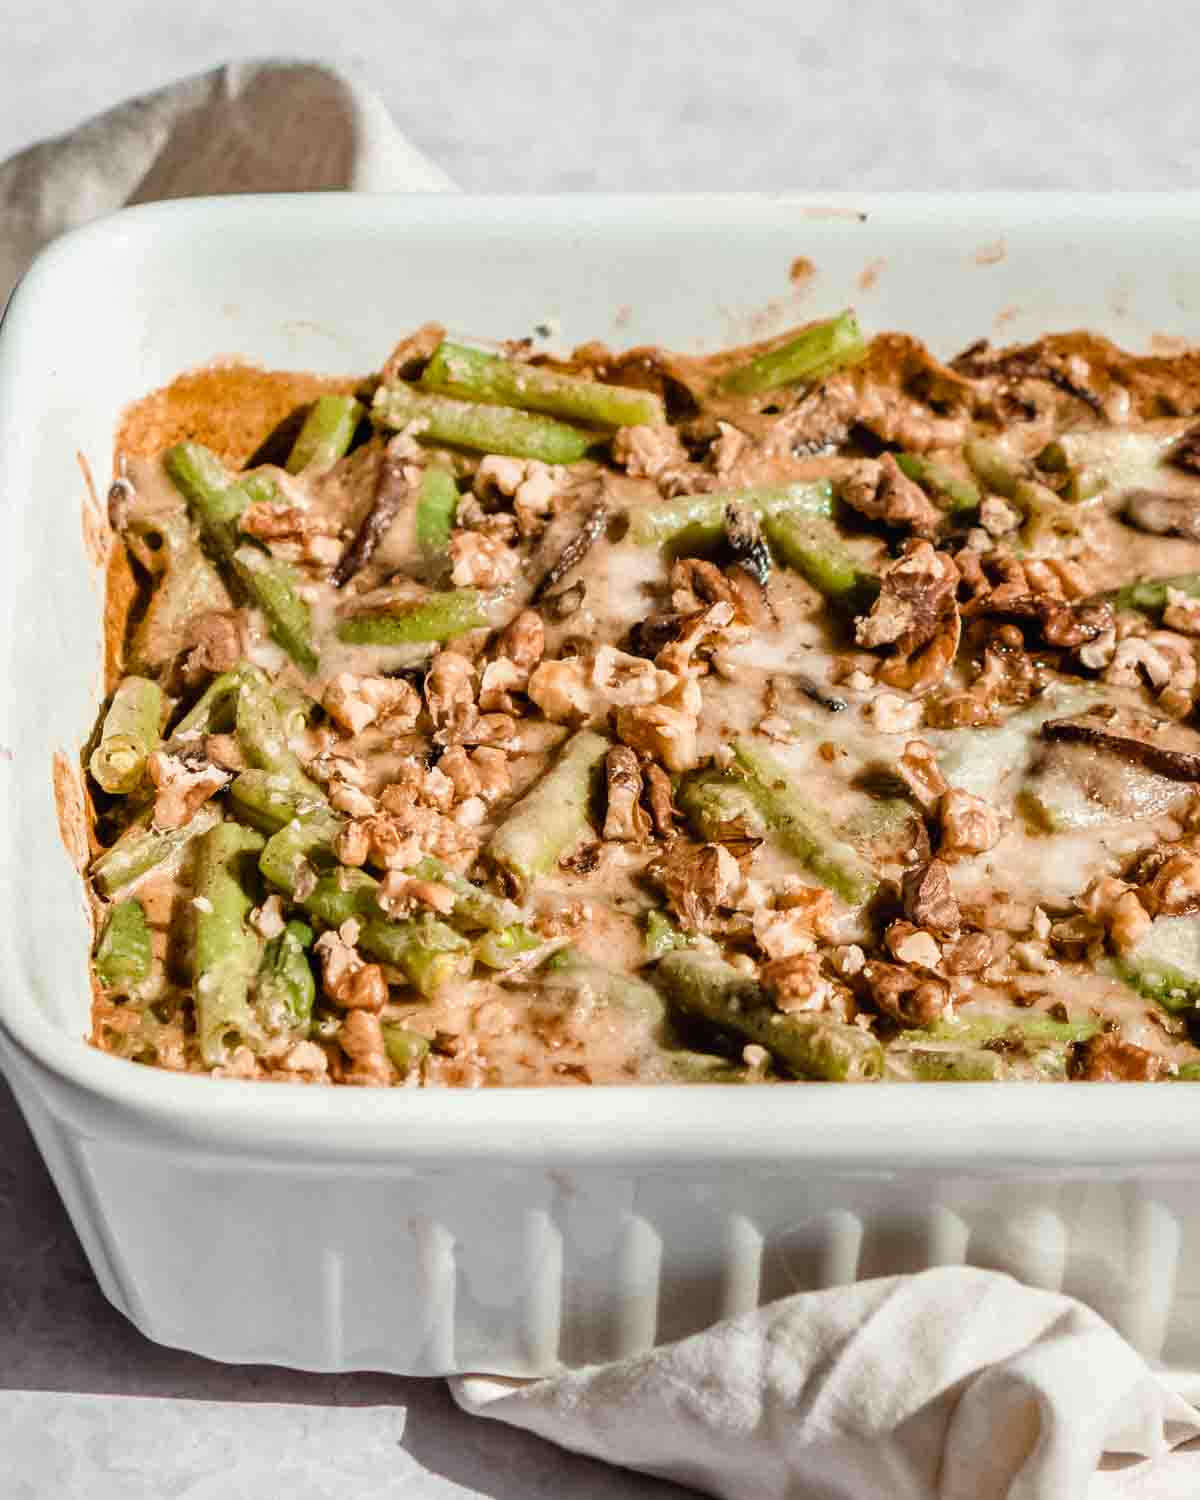 green bean casserole without mushroom soup in a baking tray.